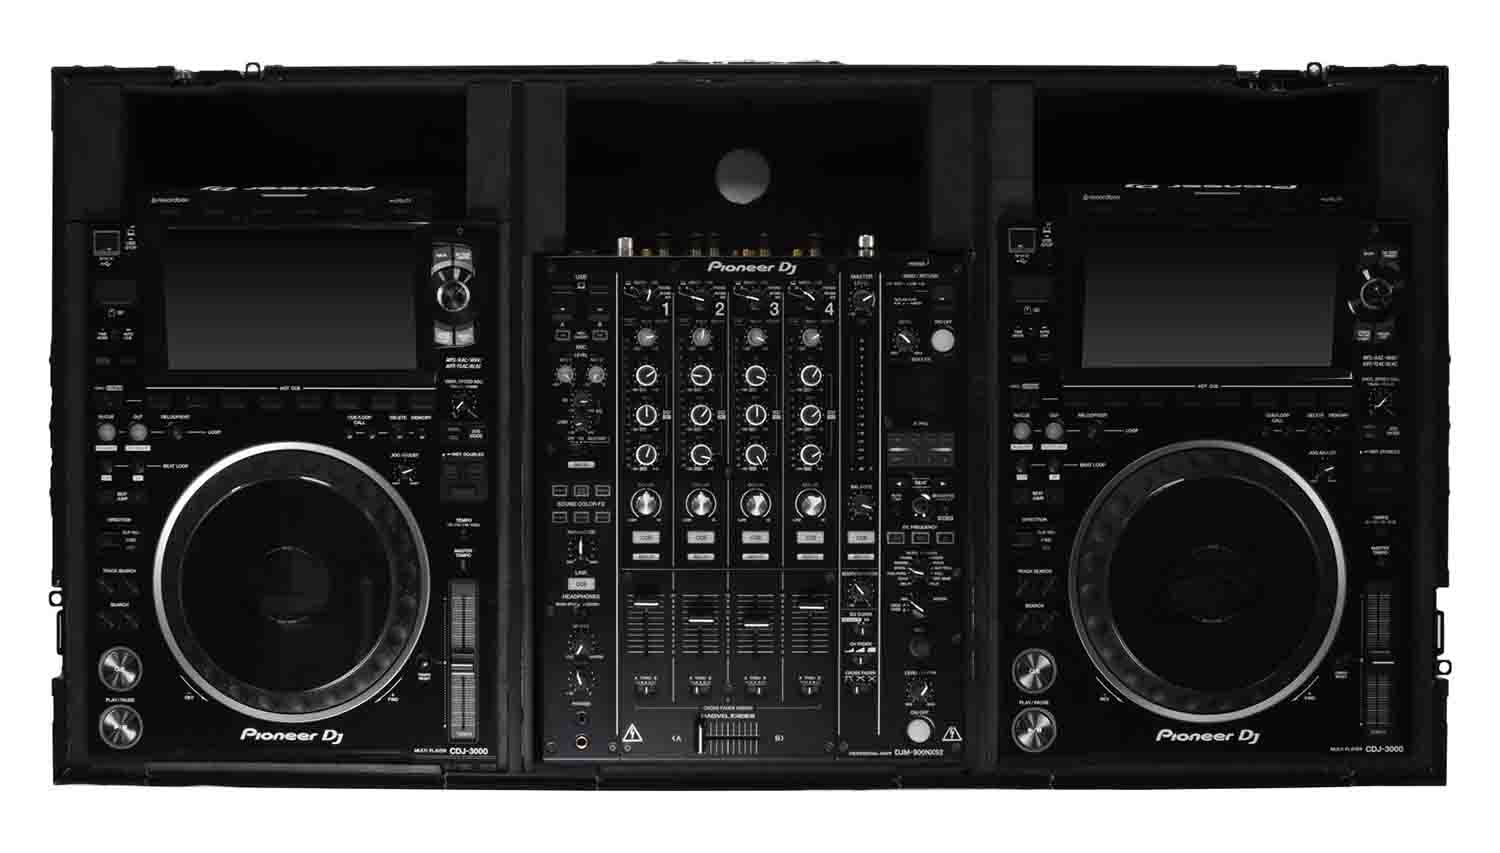 B-Stock: Odyssey 810158 Industrial Board DJ Case for 12" DJ Mixers and Two Pioneer CDJ-3000 Multi Players - Hollywood DJ